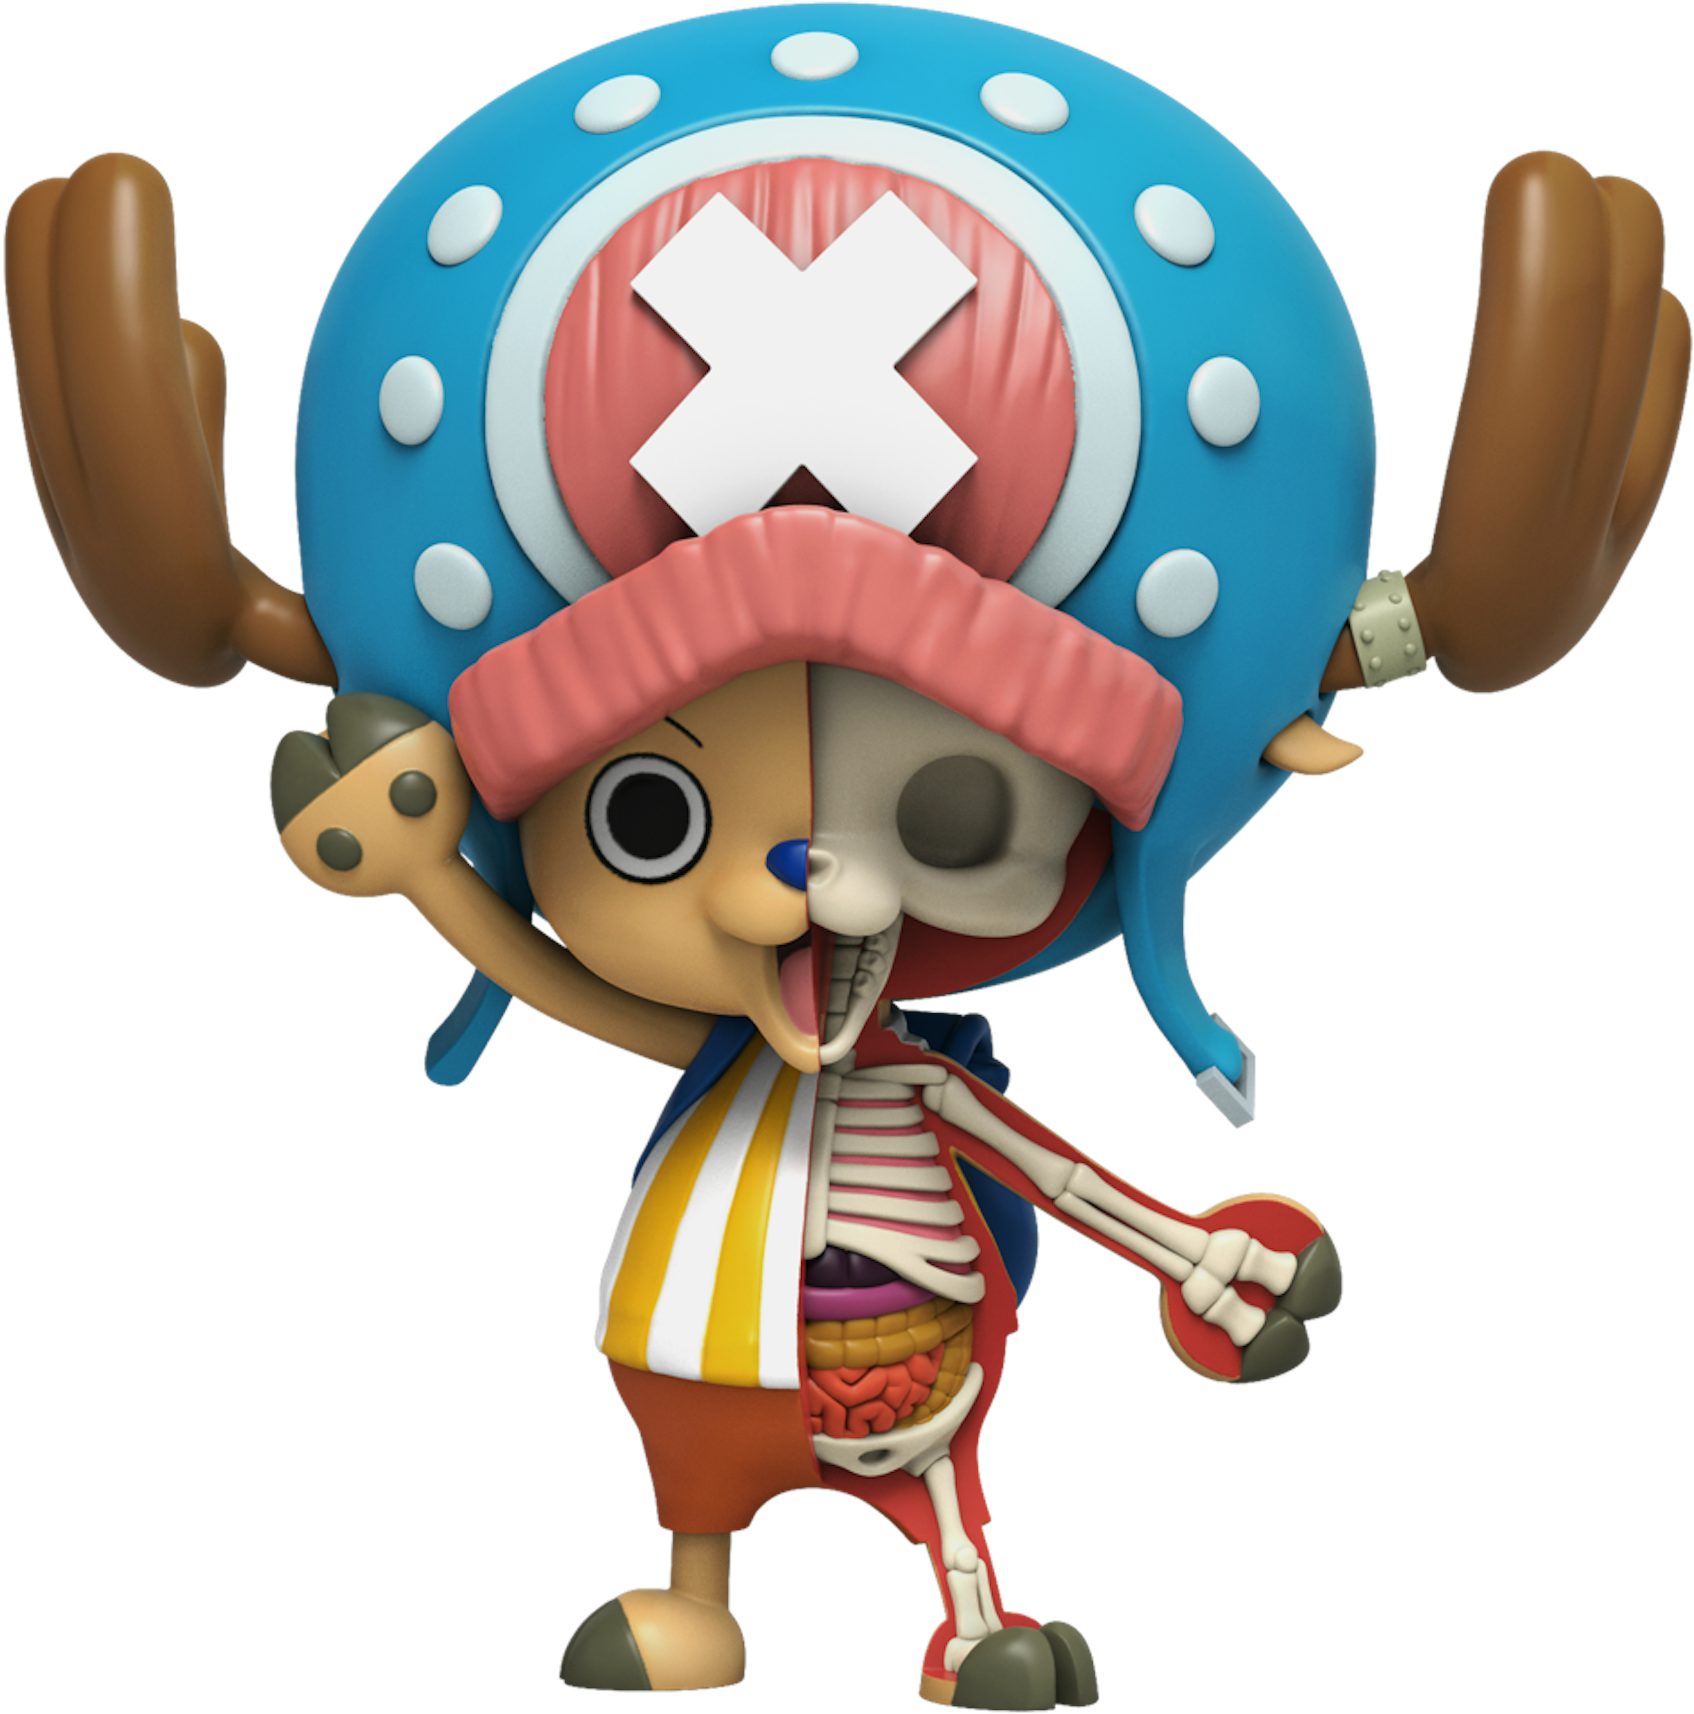 https://images.stockx.com/images/Jason-Freeny-Hidden-Dissectables-One-Piece-Chopper-Figure.png?fit=fill&bg=FFFFFF&w=1200&h=857&fm=jpg&auto=compress&dpr=2&trim=color&updated_at=1628601634&q=60